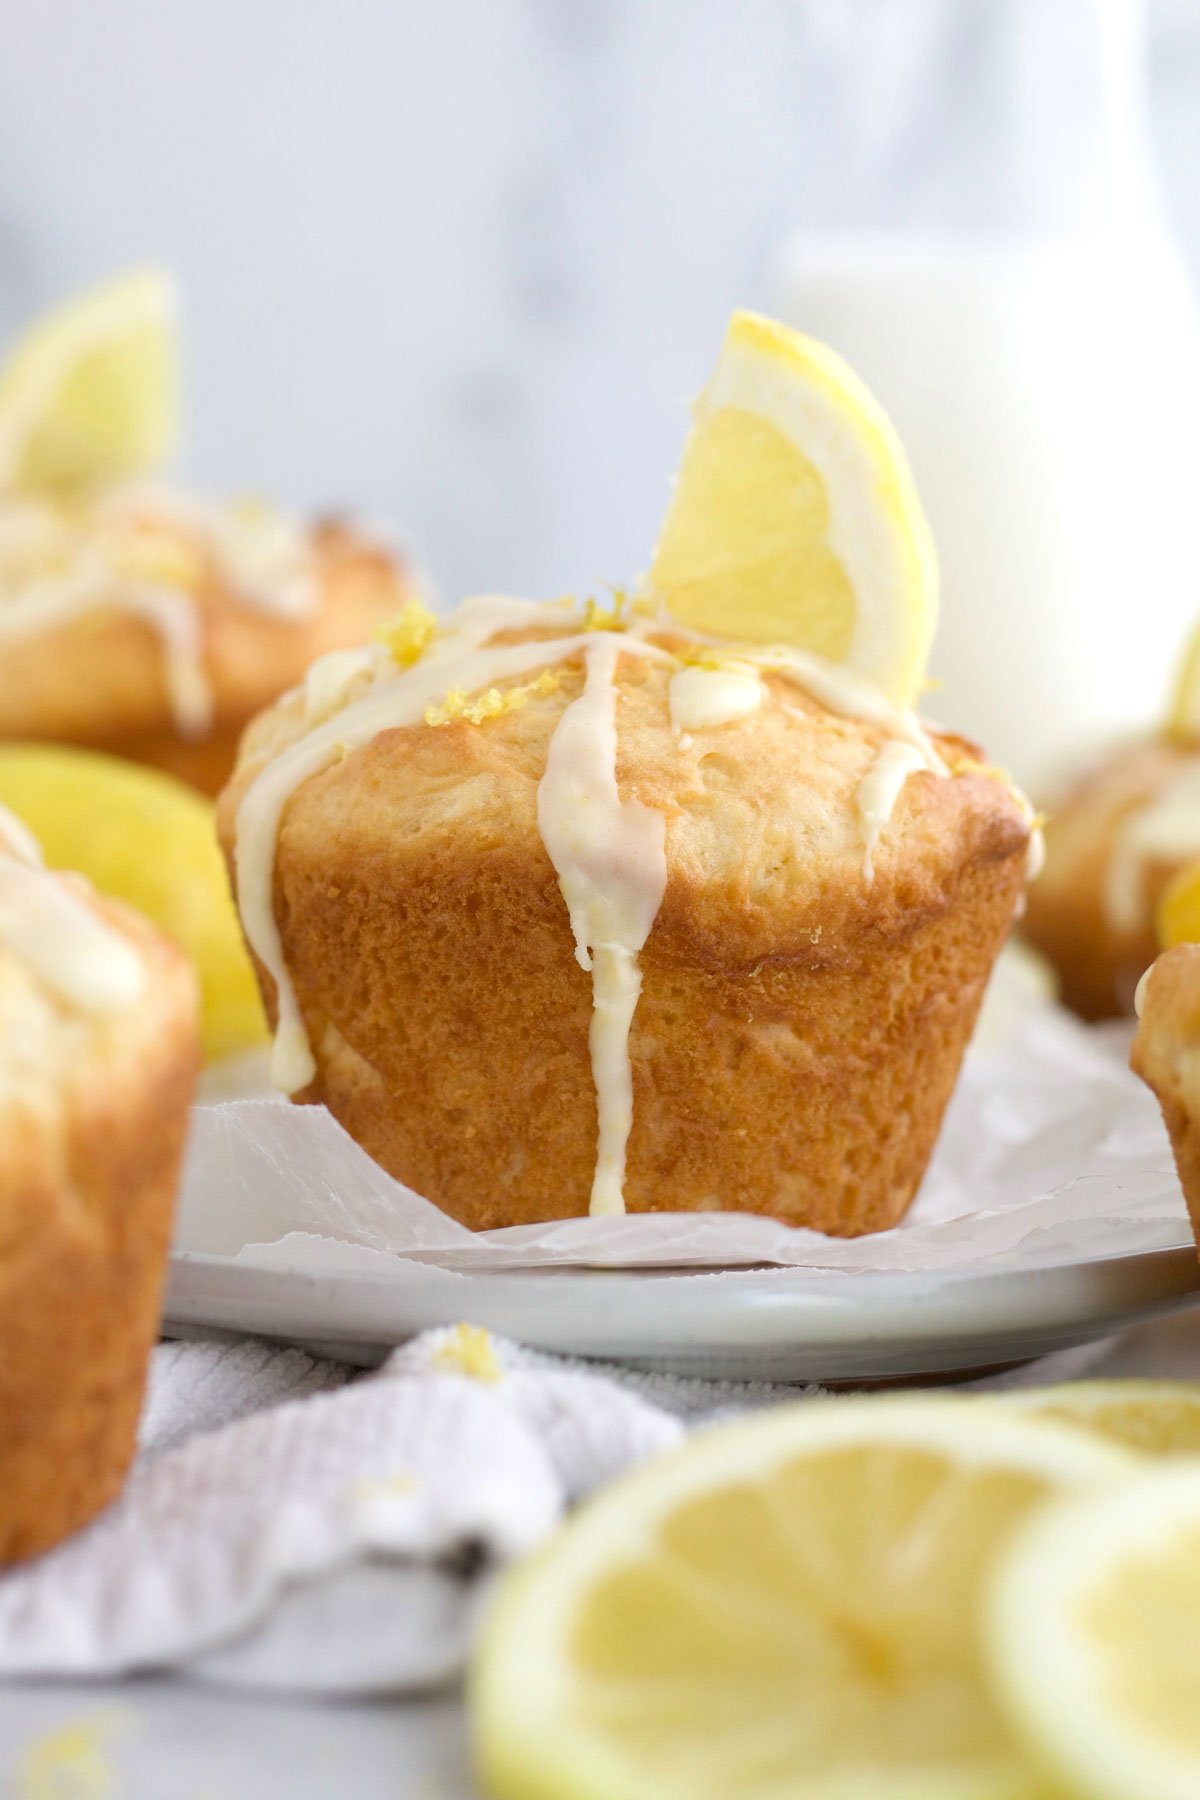 A lemon wedge sits like a flag of deliciousness on this light and zesty Lemon Muffin.